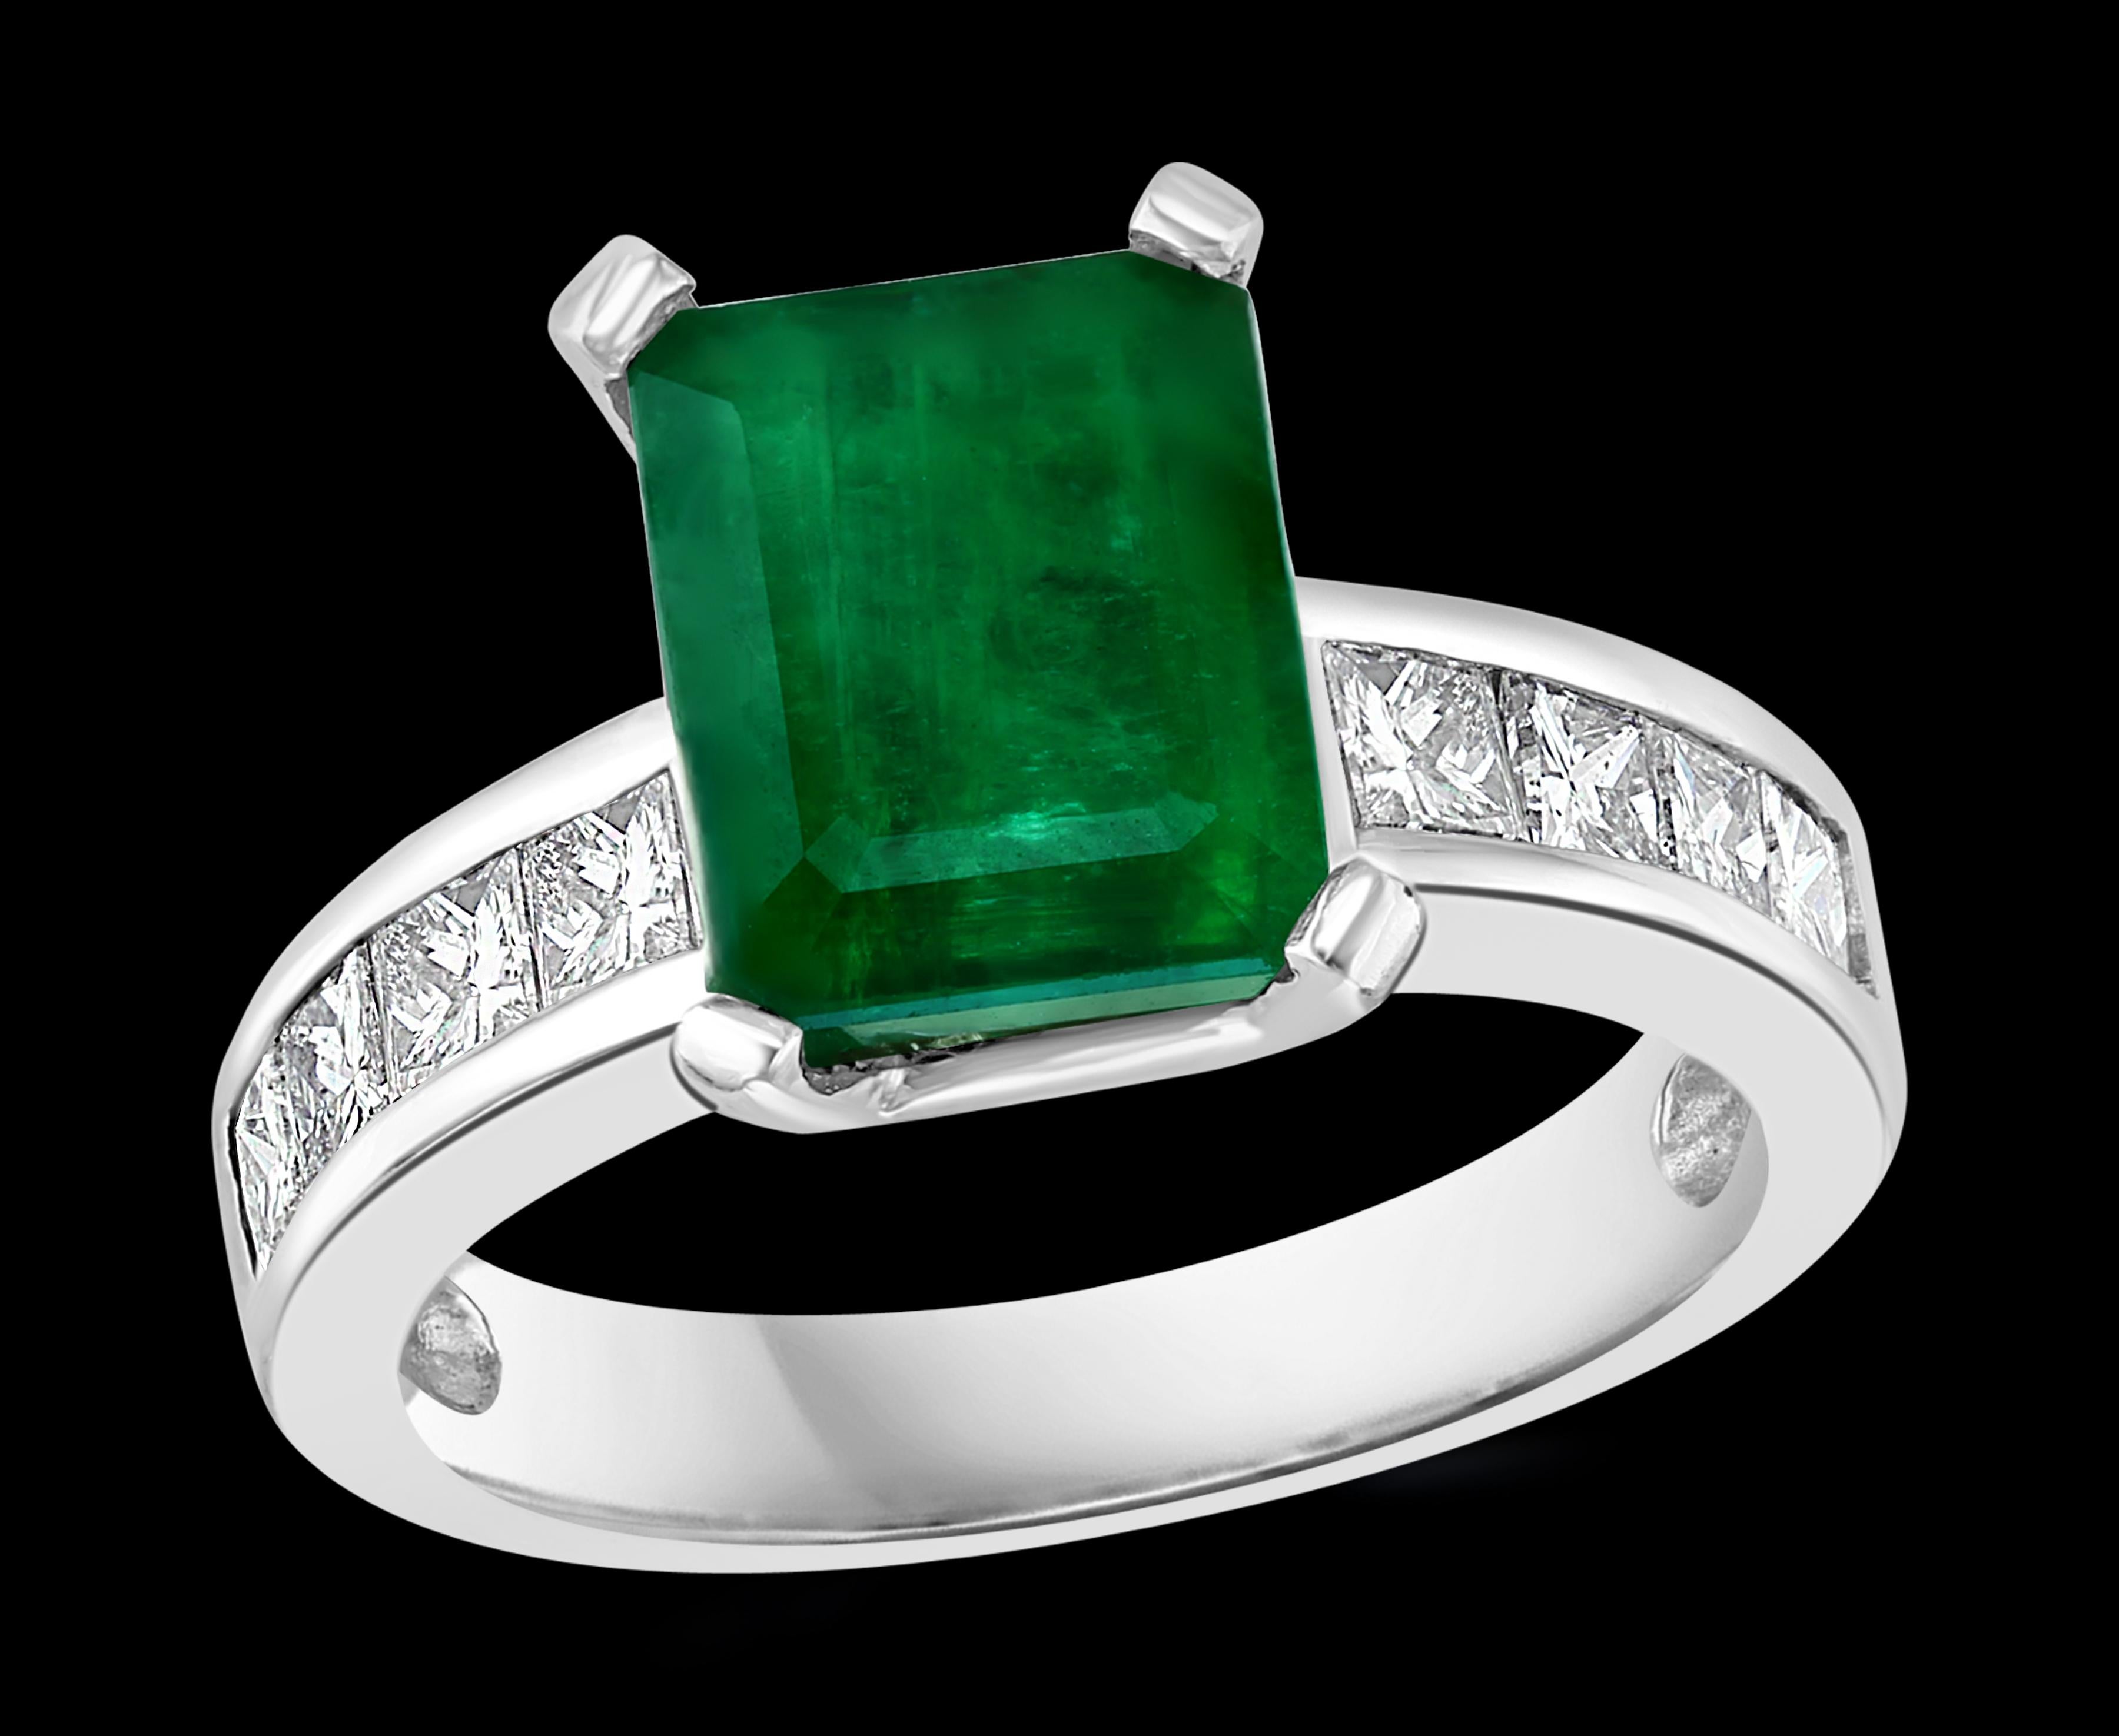 
3.5 Carat Emerald Cut Emerald & 0.5 Carat Diamond Ring 14 K White Gold
Emeralds are very precious , Very Difficult to find and getting more more difficult to find.
A classic, Cocktail ring 
 Emerald measurements 9.7x7.5 which is approximately 3.5